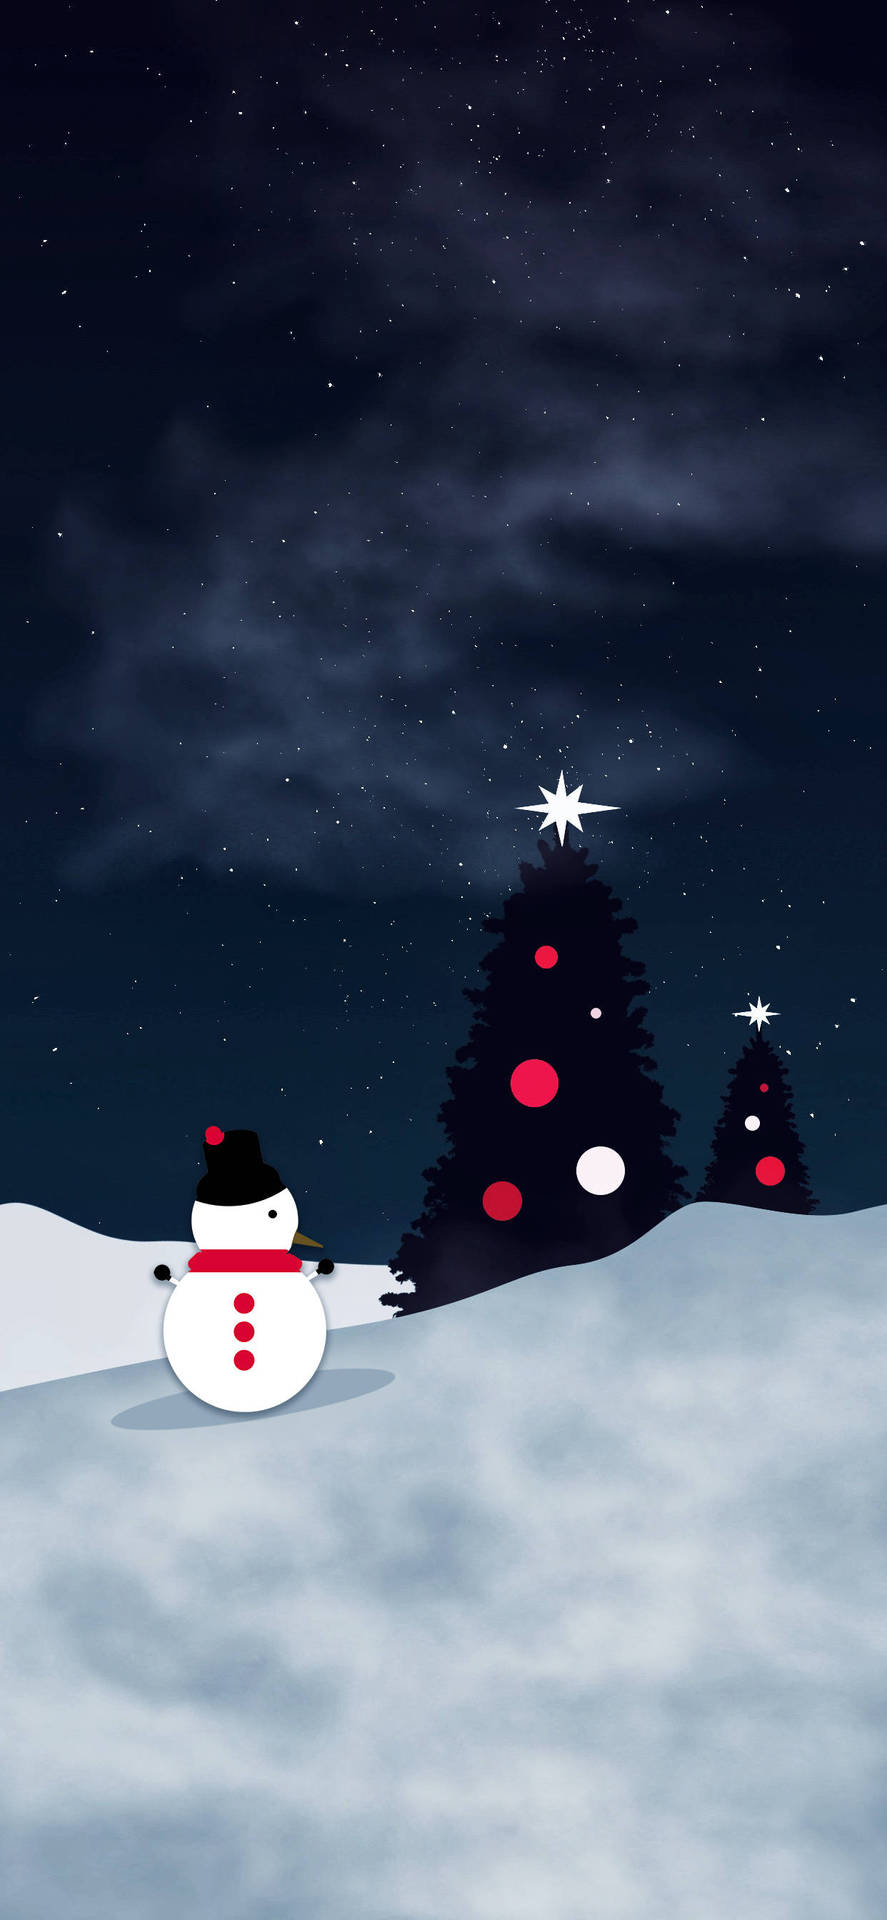 Aesthetic Christmas Iphone Of Snowman